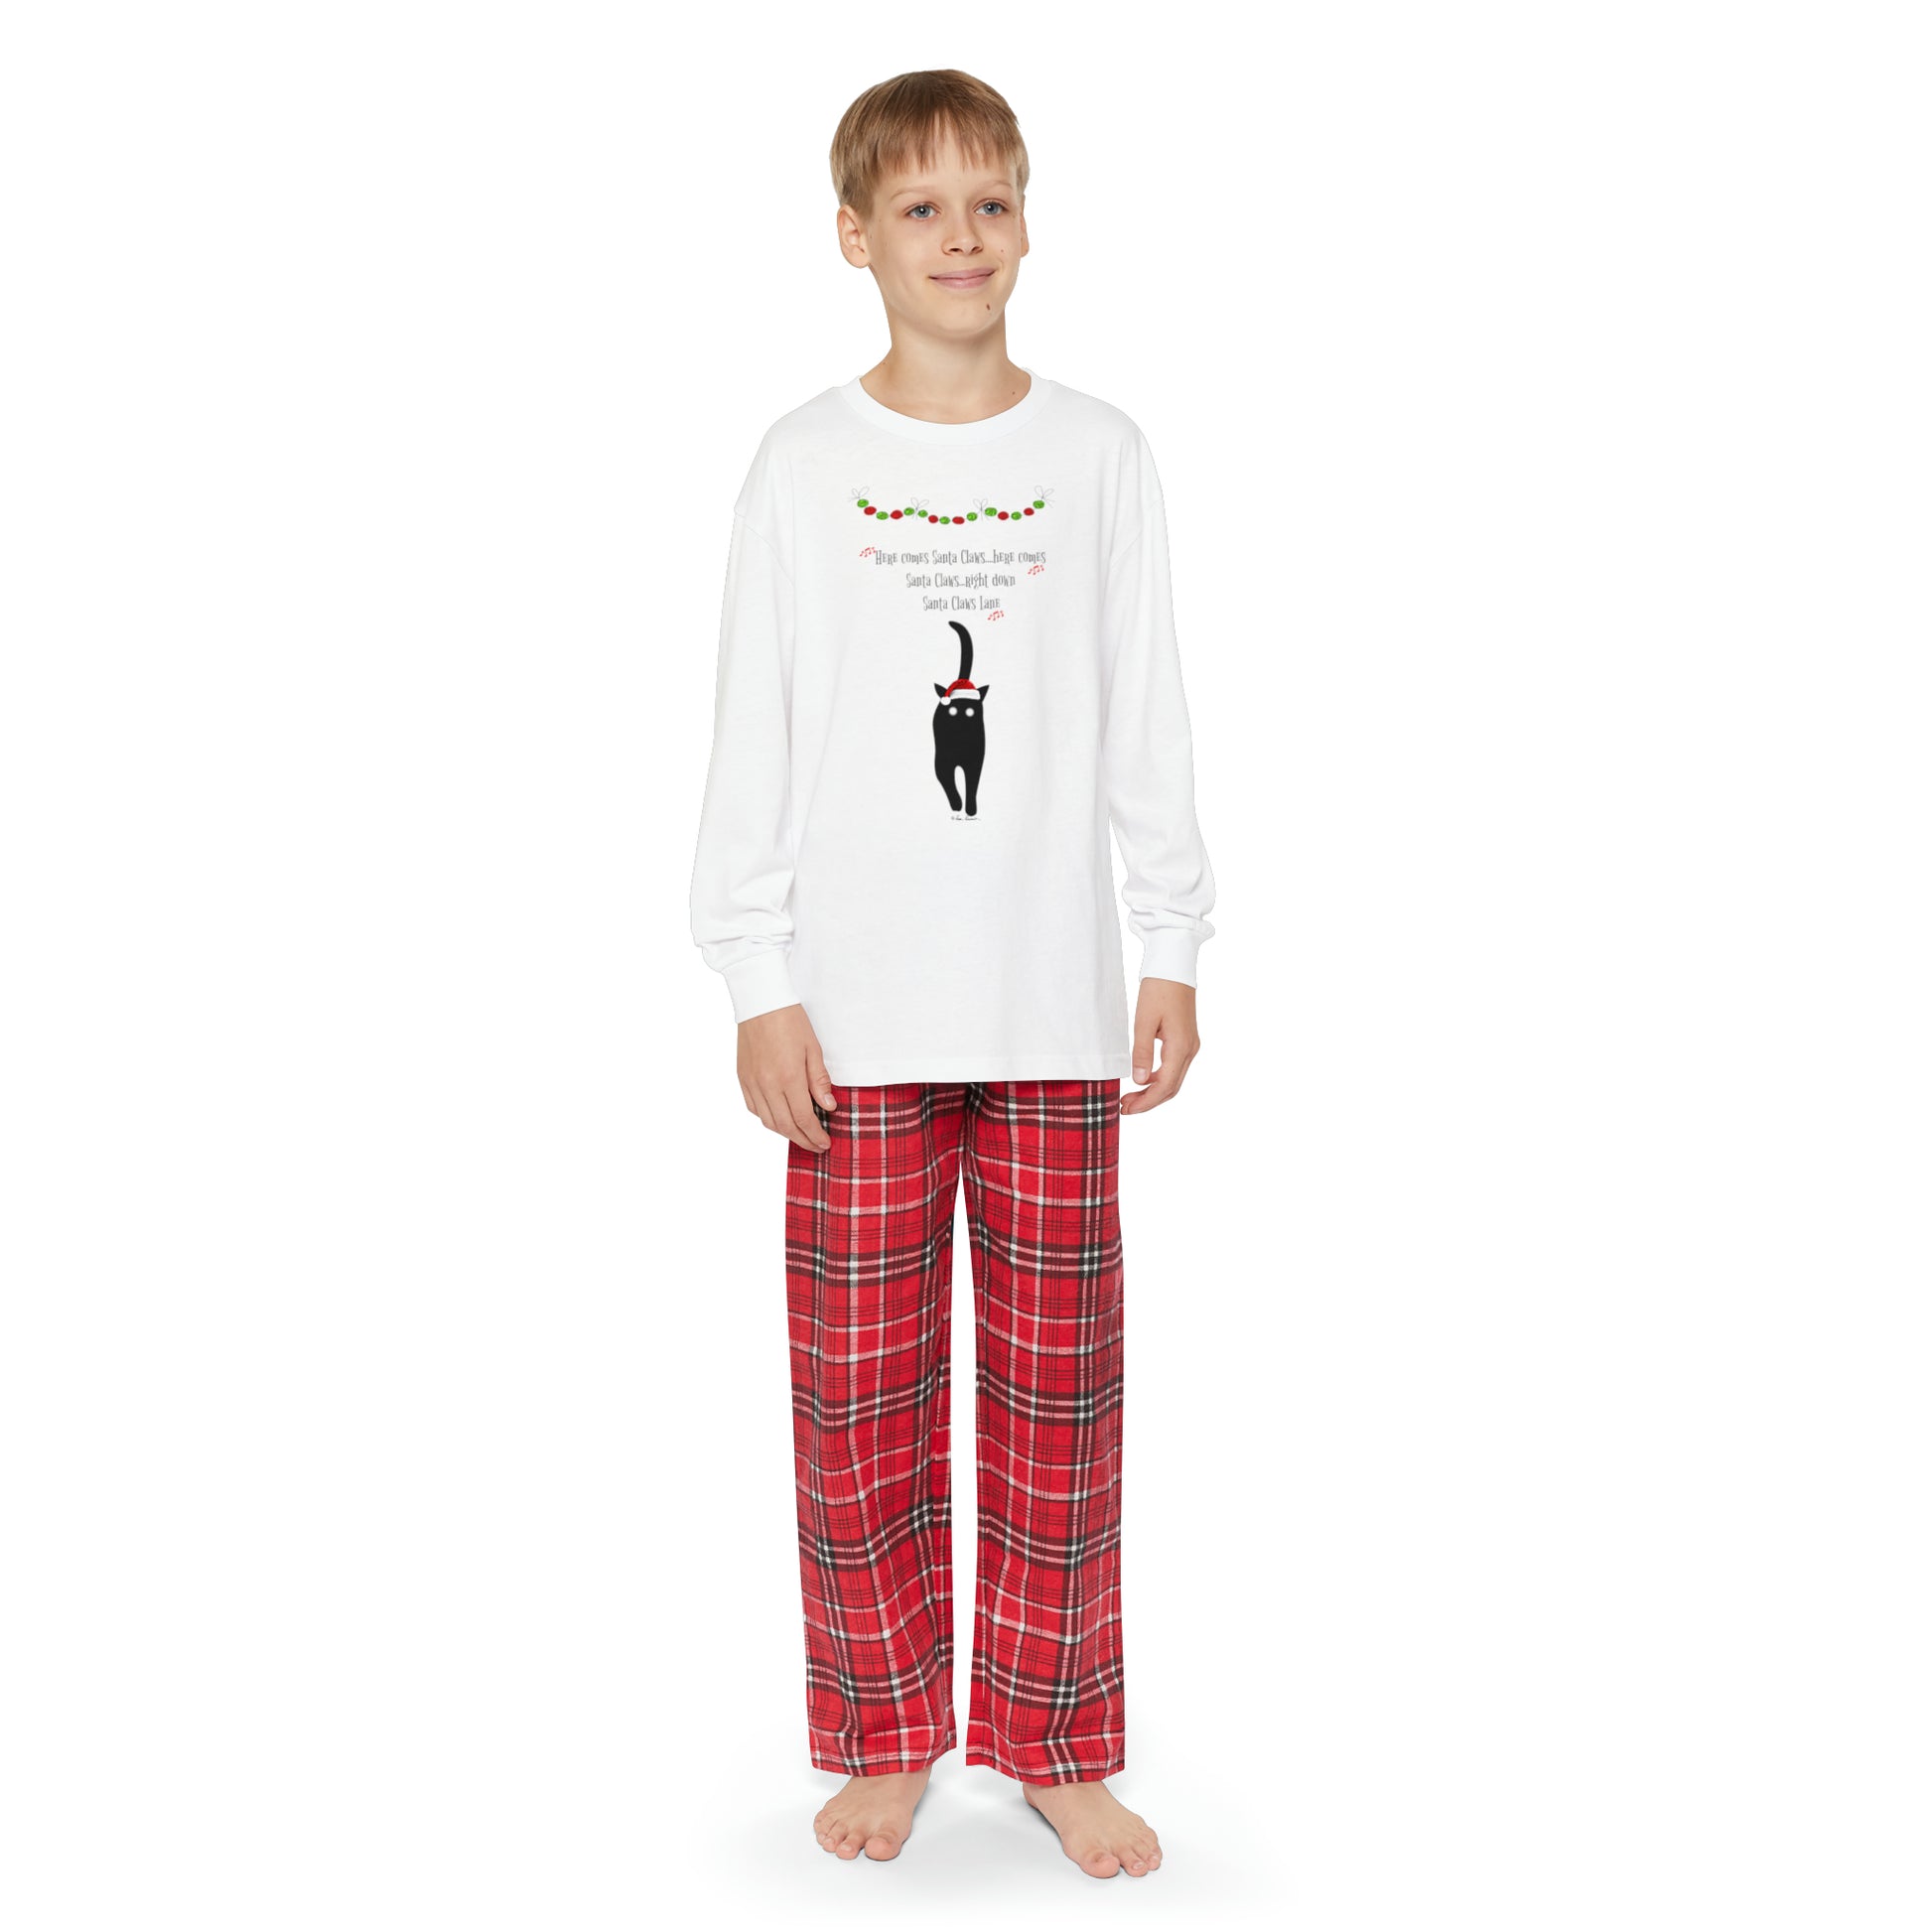 A youth wearing a Printify Matching-Family Youth Pajama-set with a reindeer design made of cotton.